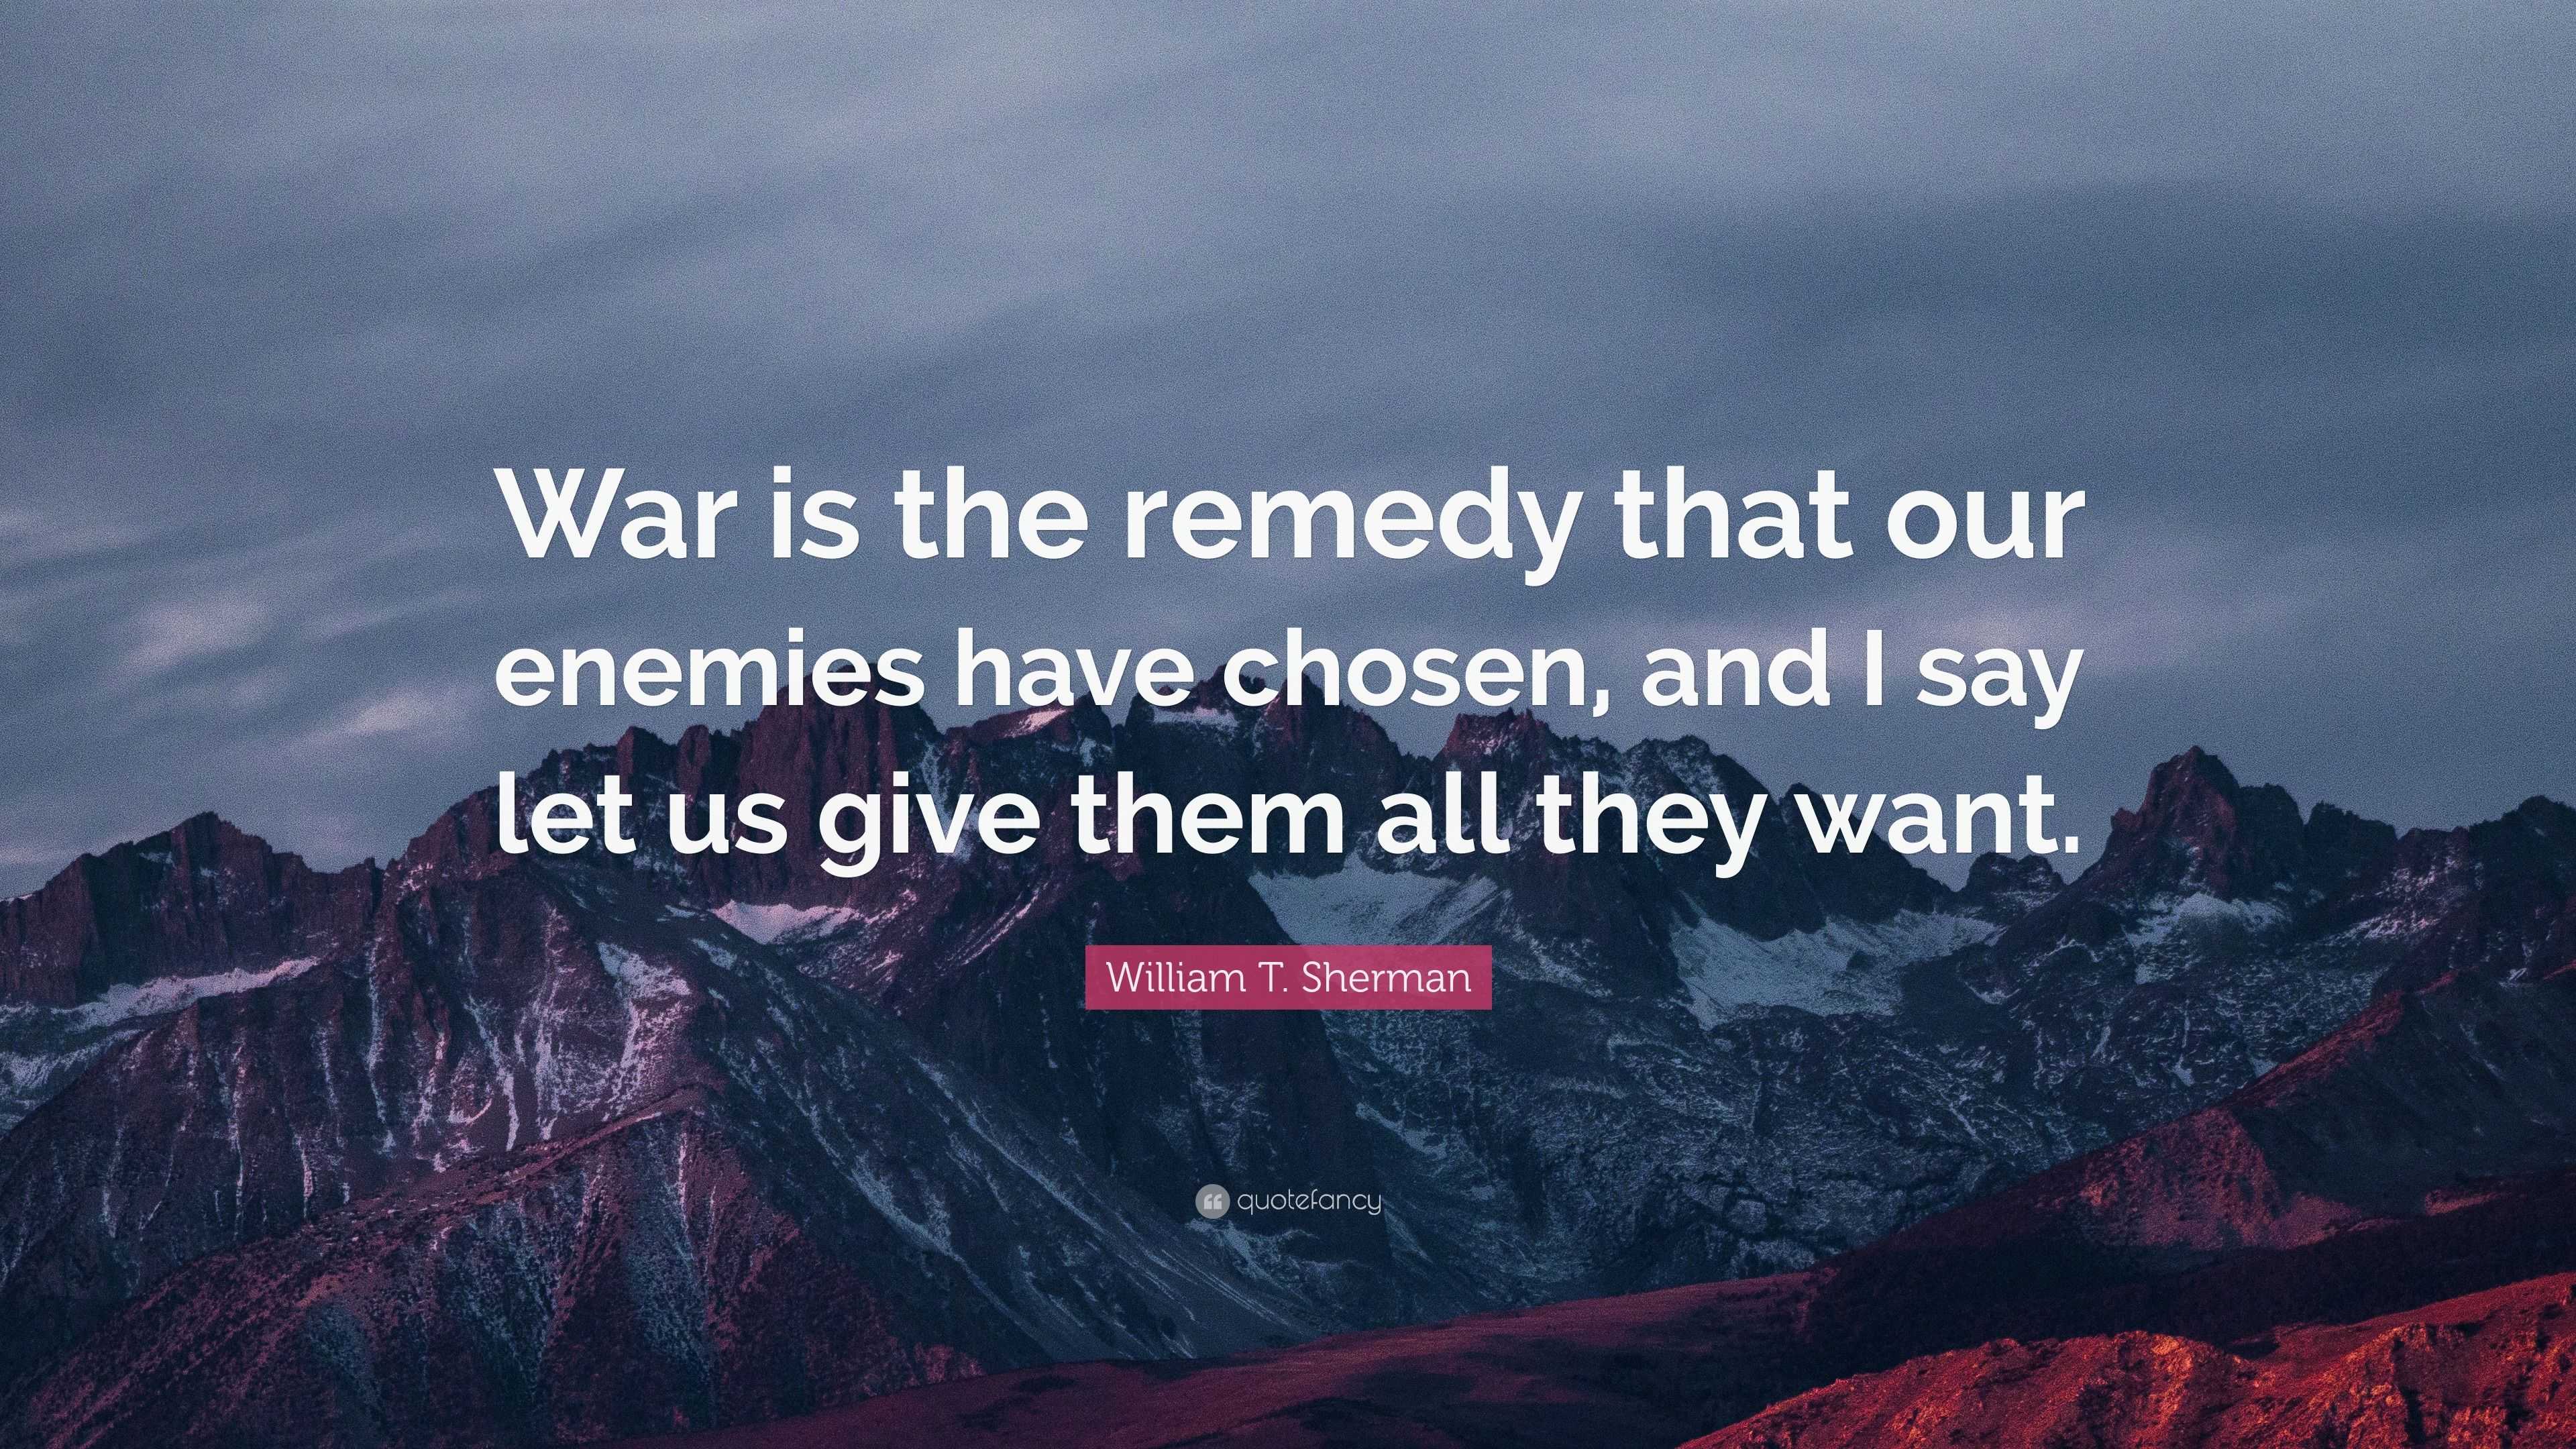 William T. Sherman Quote: “War is the remedy that our enemies have